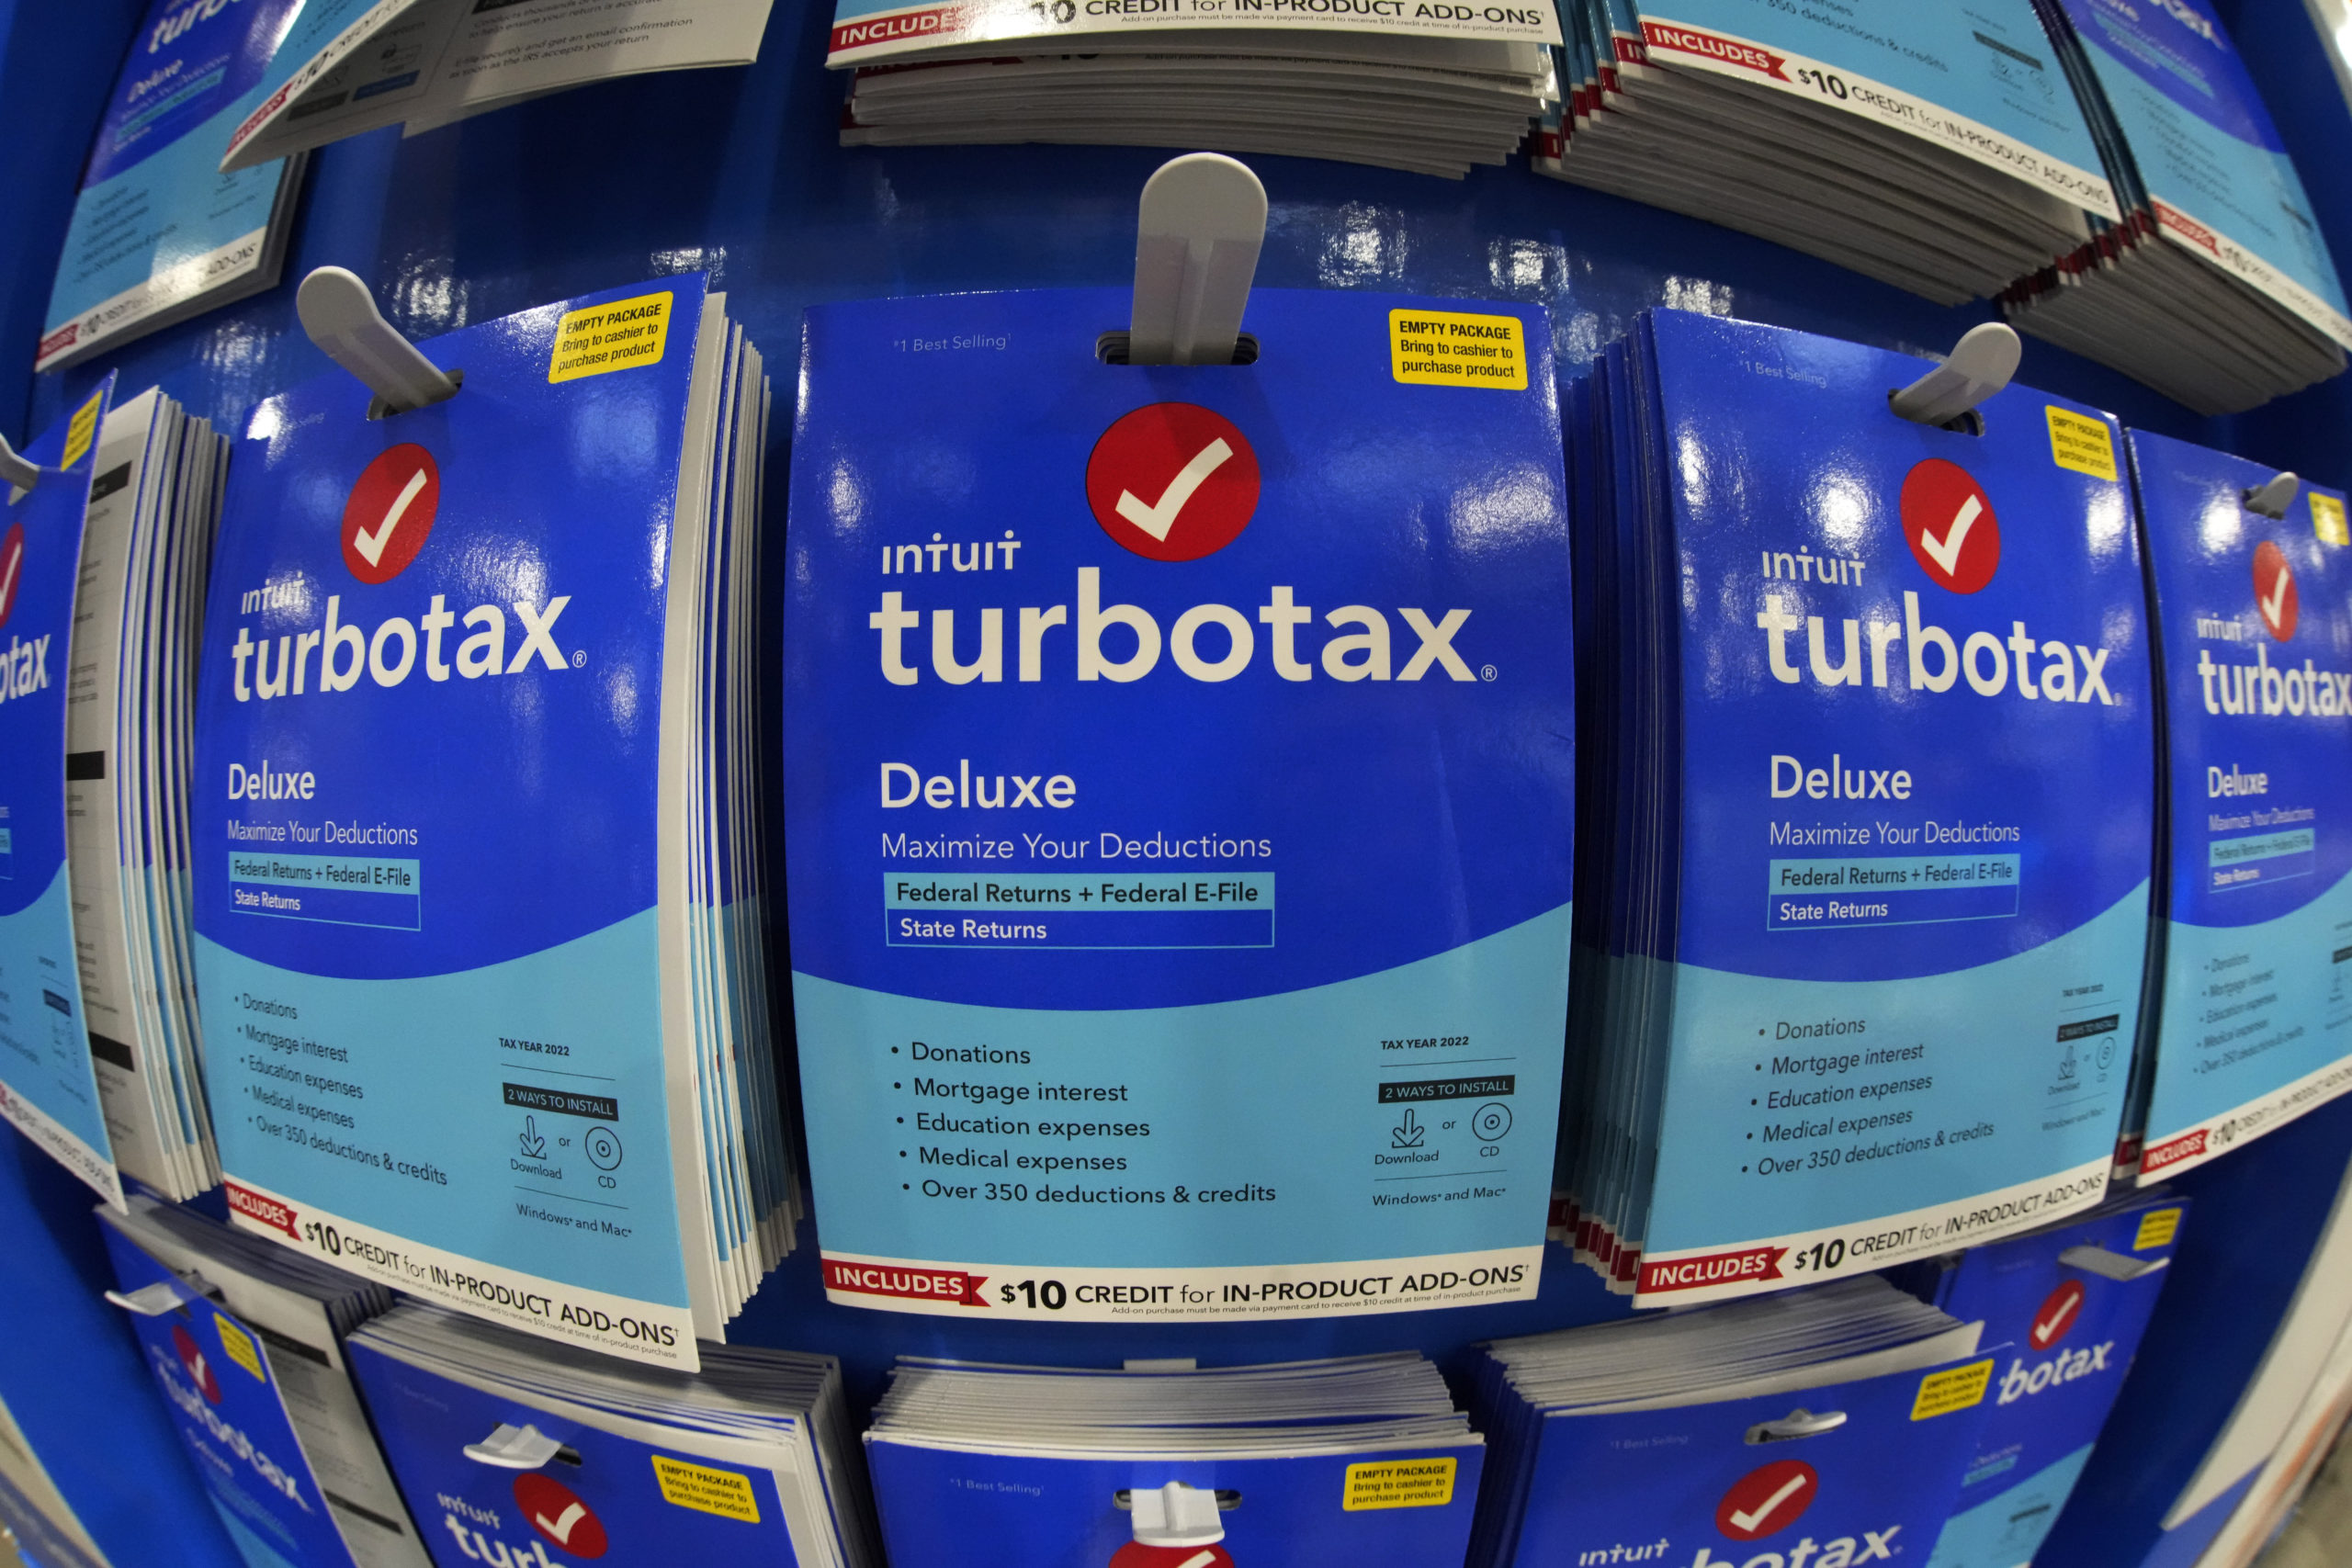 a display of TurboTax in a Costco Warehouse